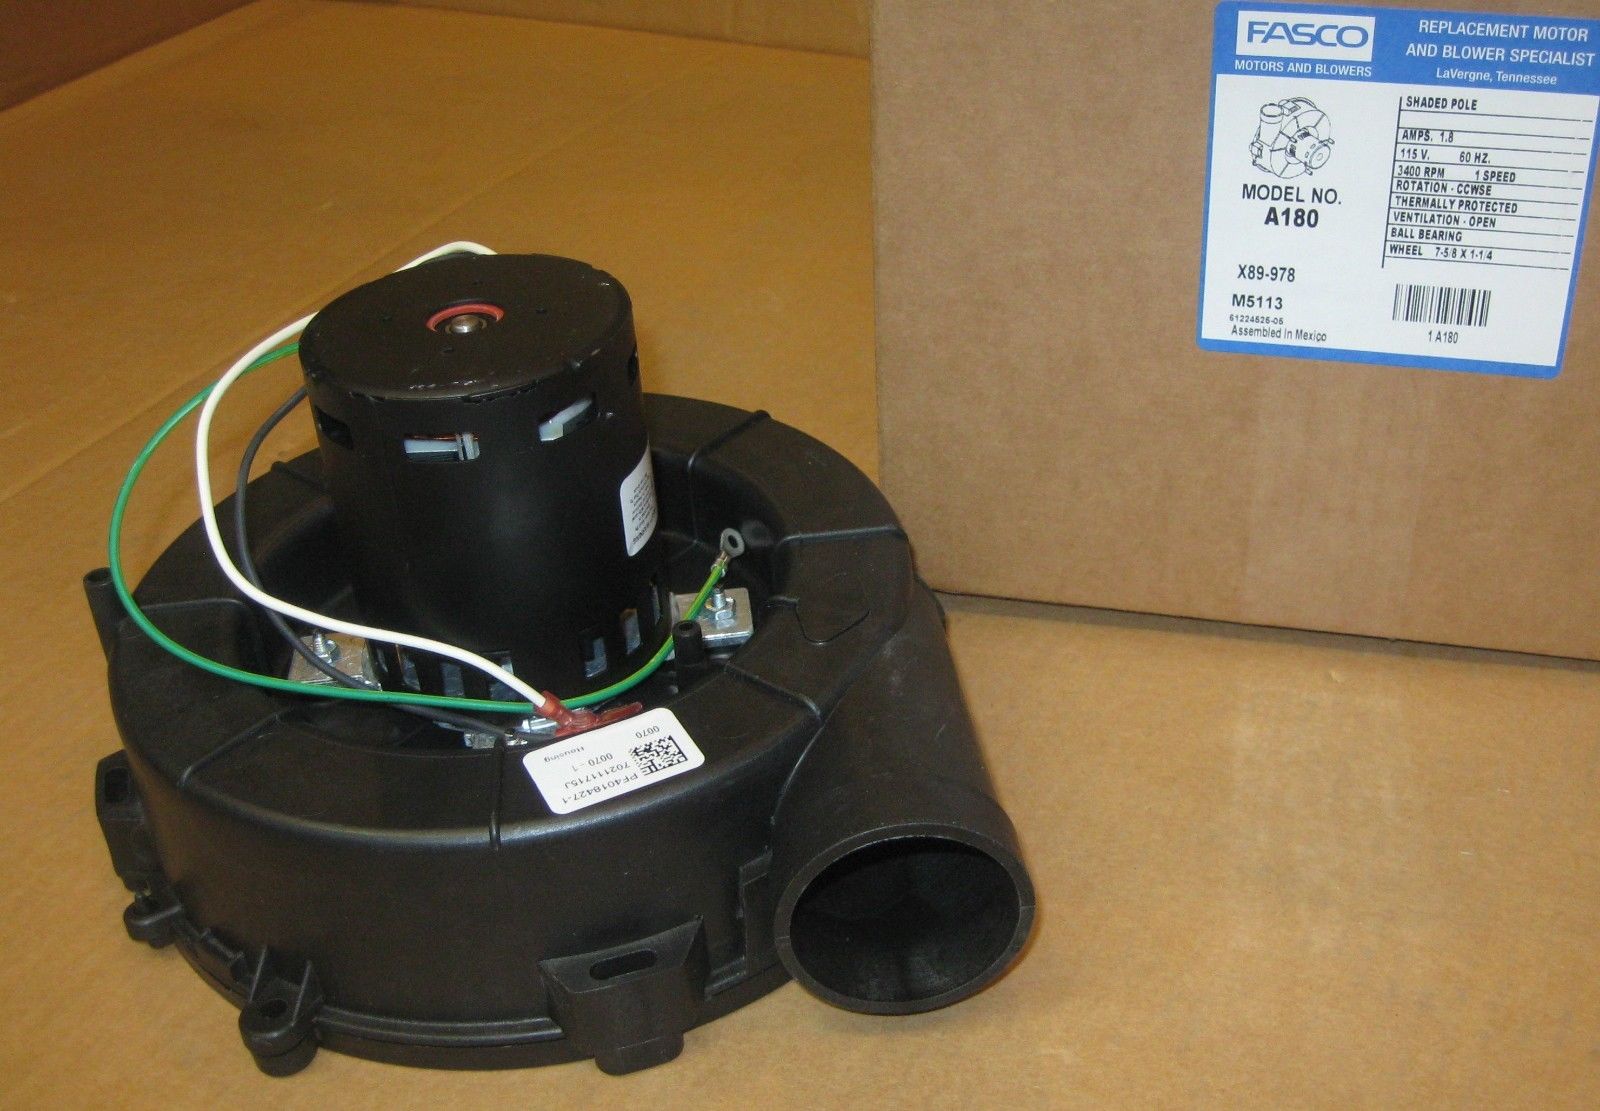 Fasco A180 Draft Inducer Blower Motor for Goodman 7021-9625 201-90601 - image 1 of 9